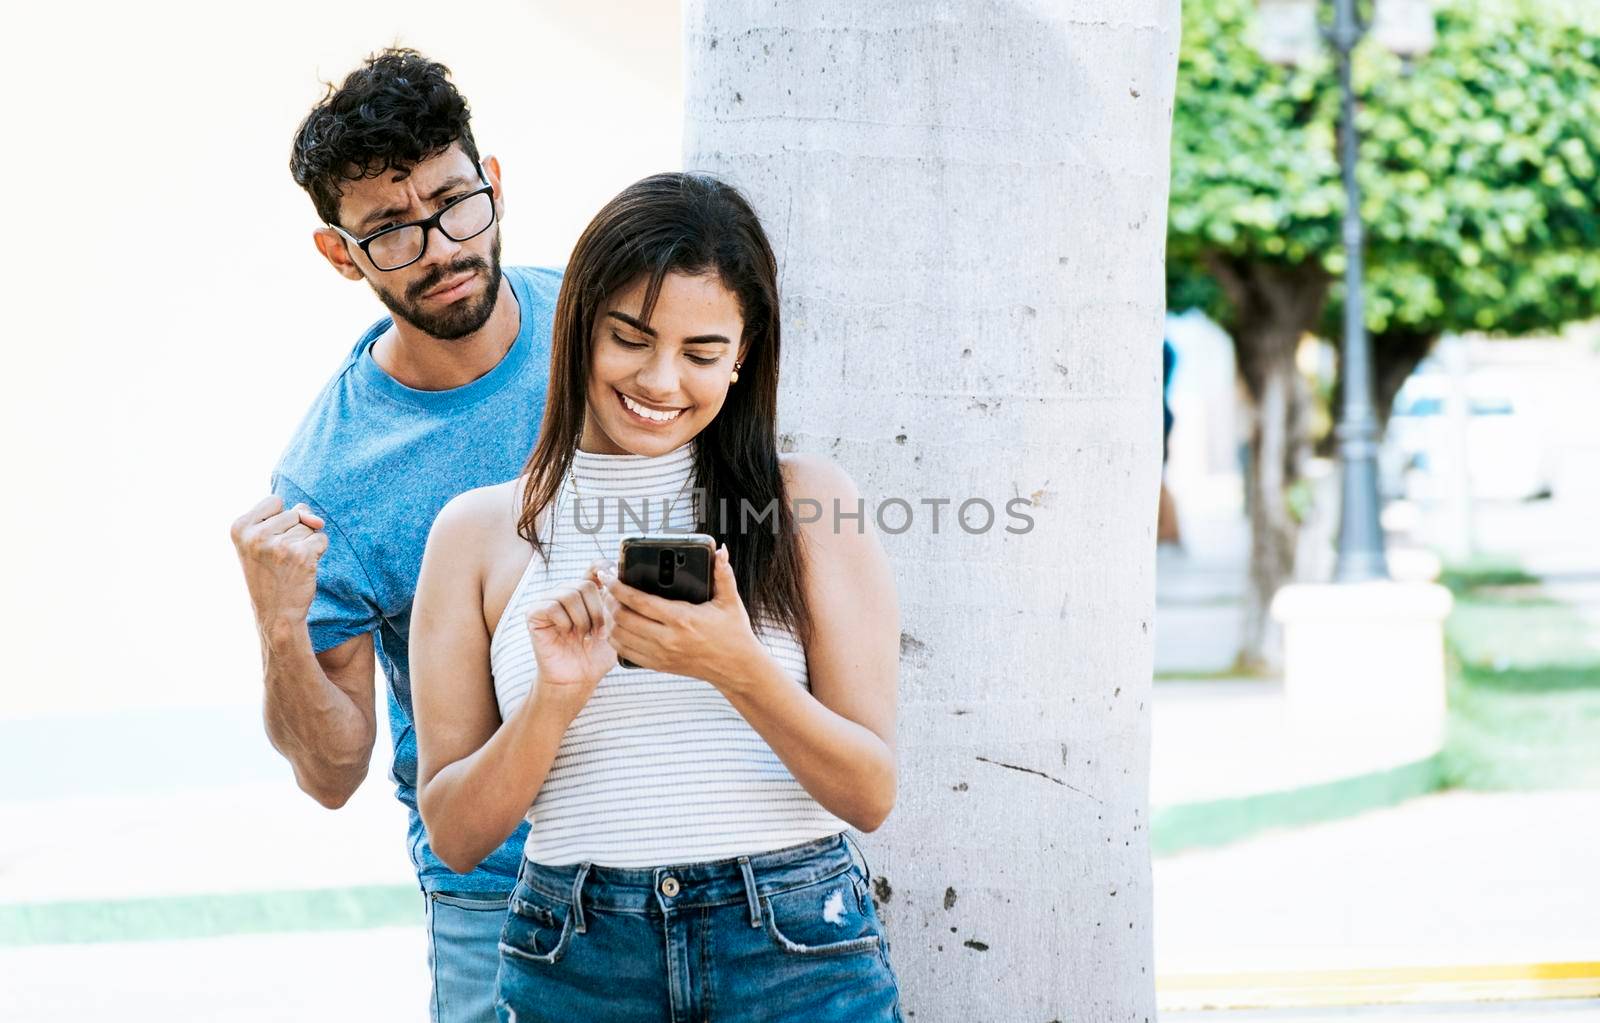 Jealous man spying on his girlfriend texting on the cell phone. Suspicious man spying on his girlfriend with his cell phone, Jealous boyfriend spying on his girlfriend's cell phone in the park by isaiphoto